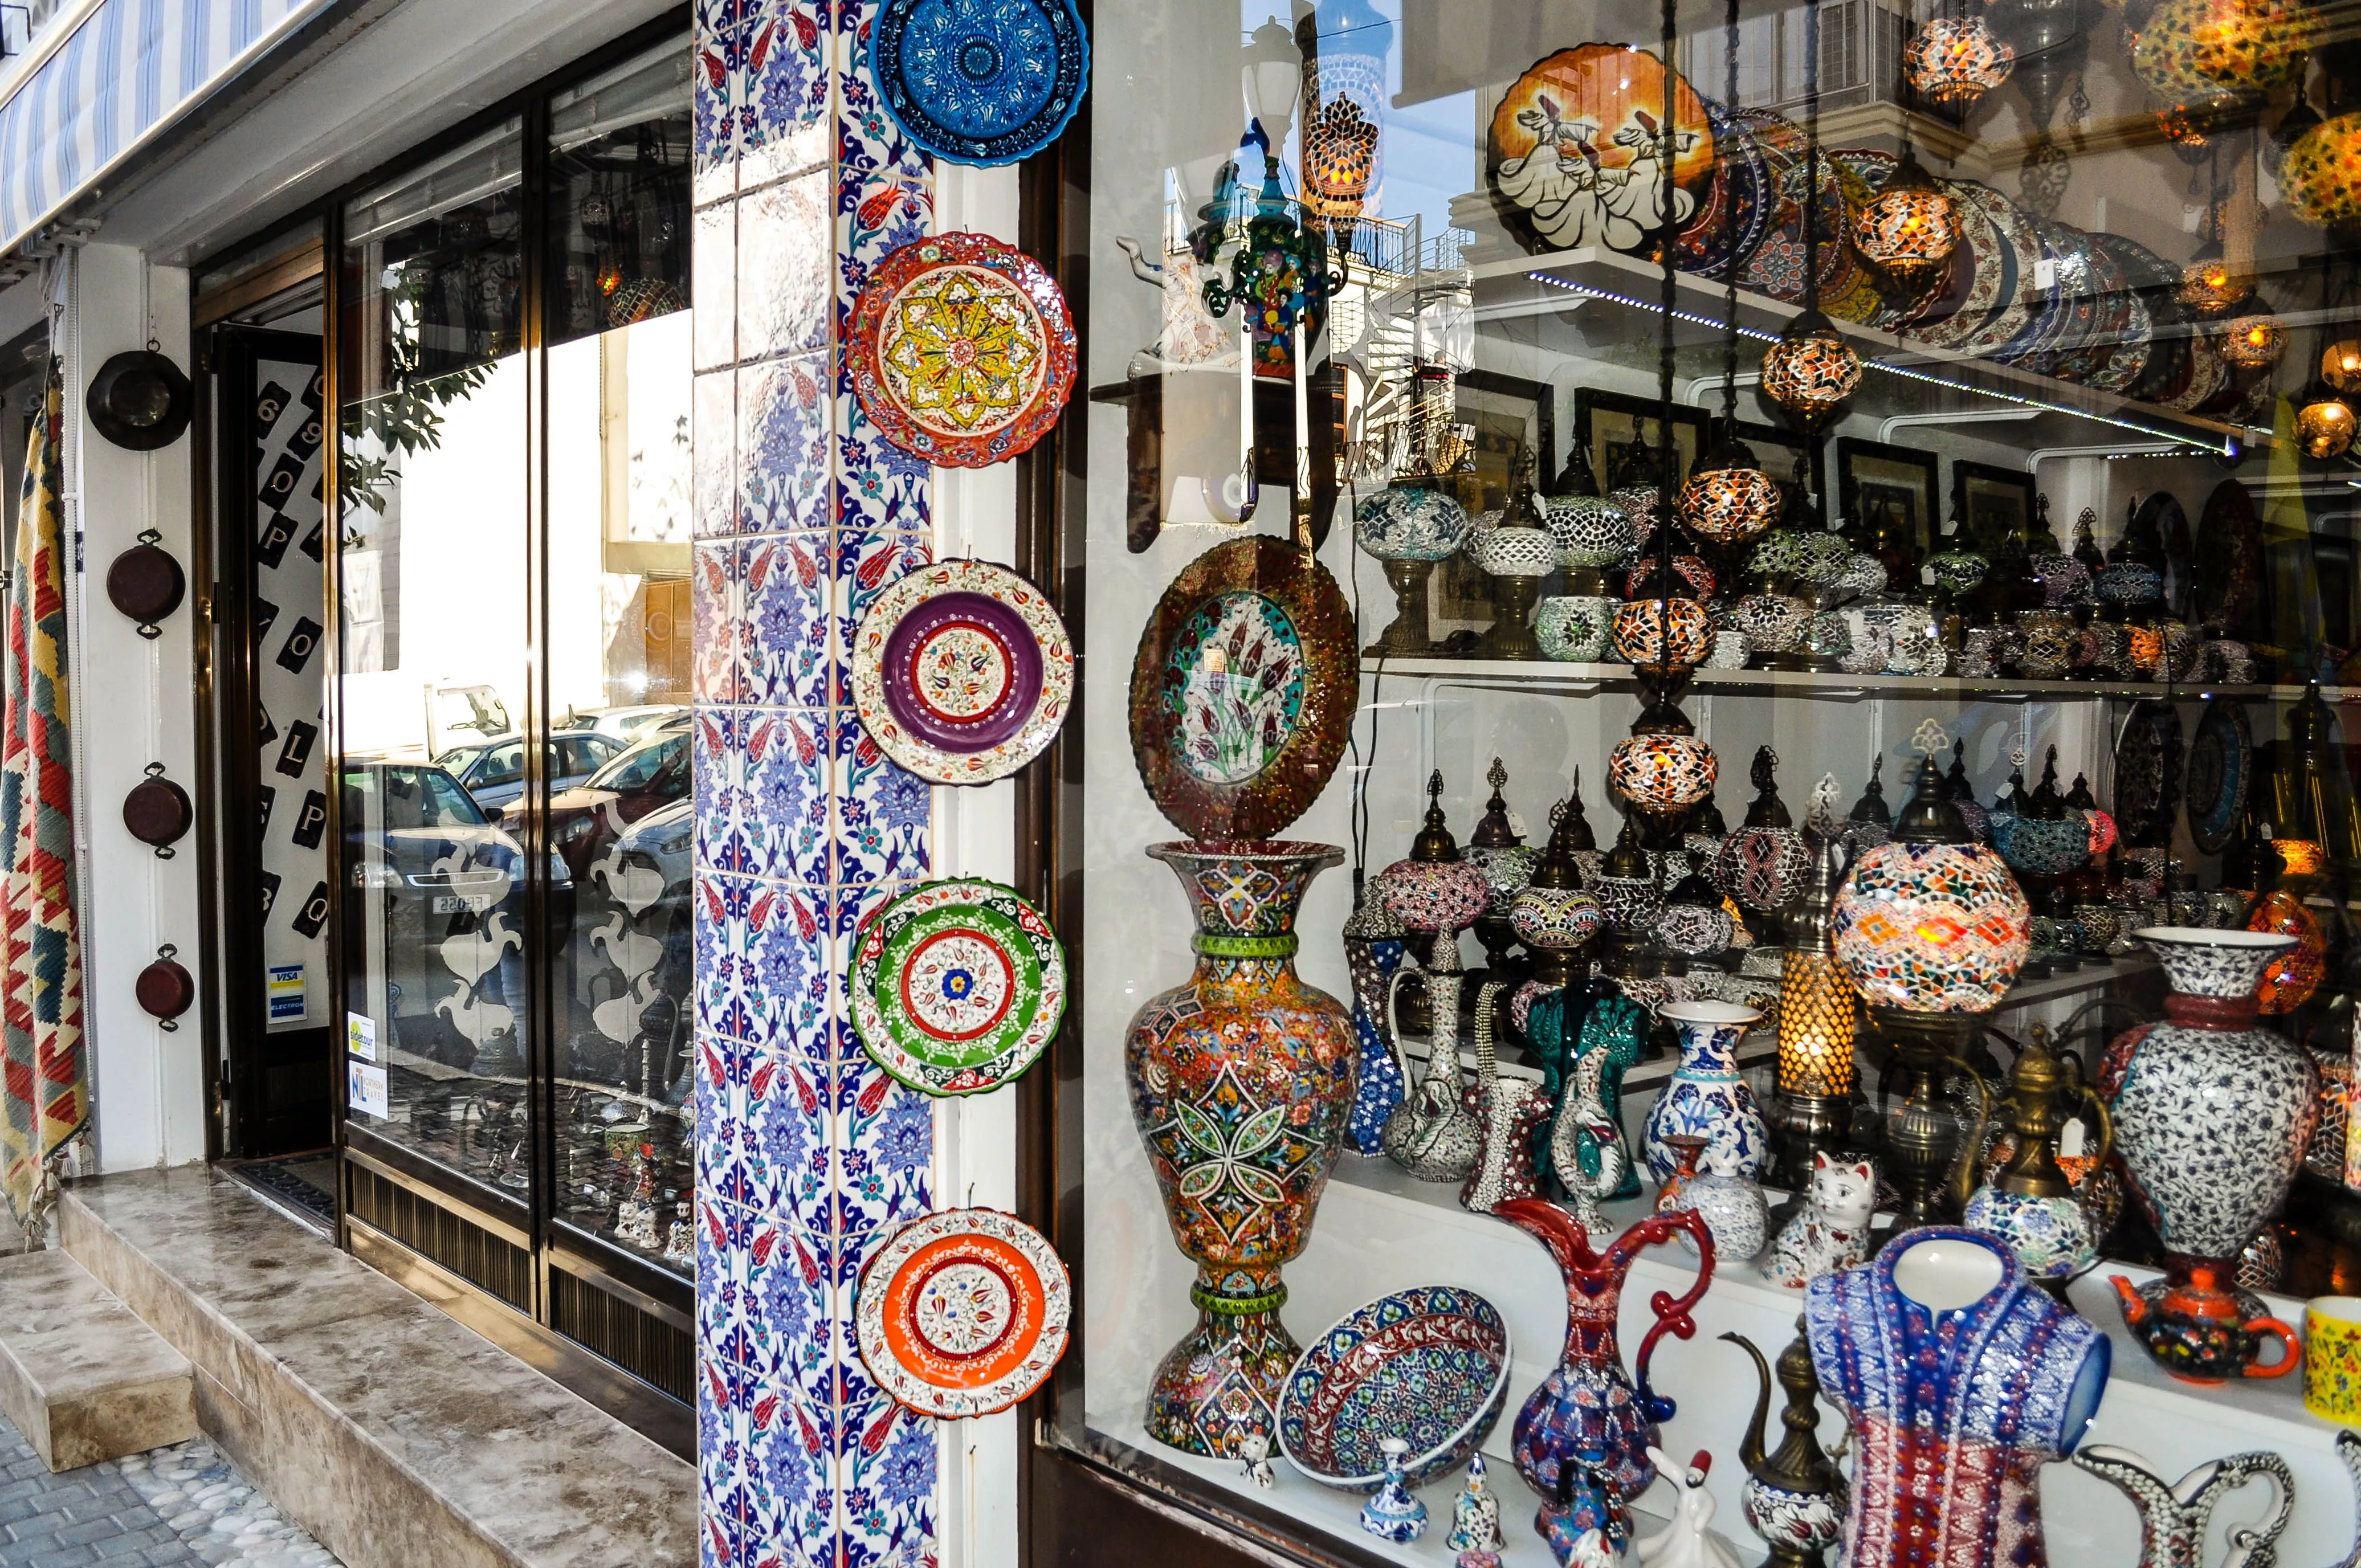 Tree of Life Ceramics & Gift Shop in Turkey, central_asia | Gifts - Rated 4.9